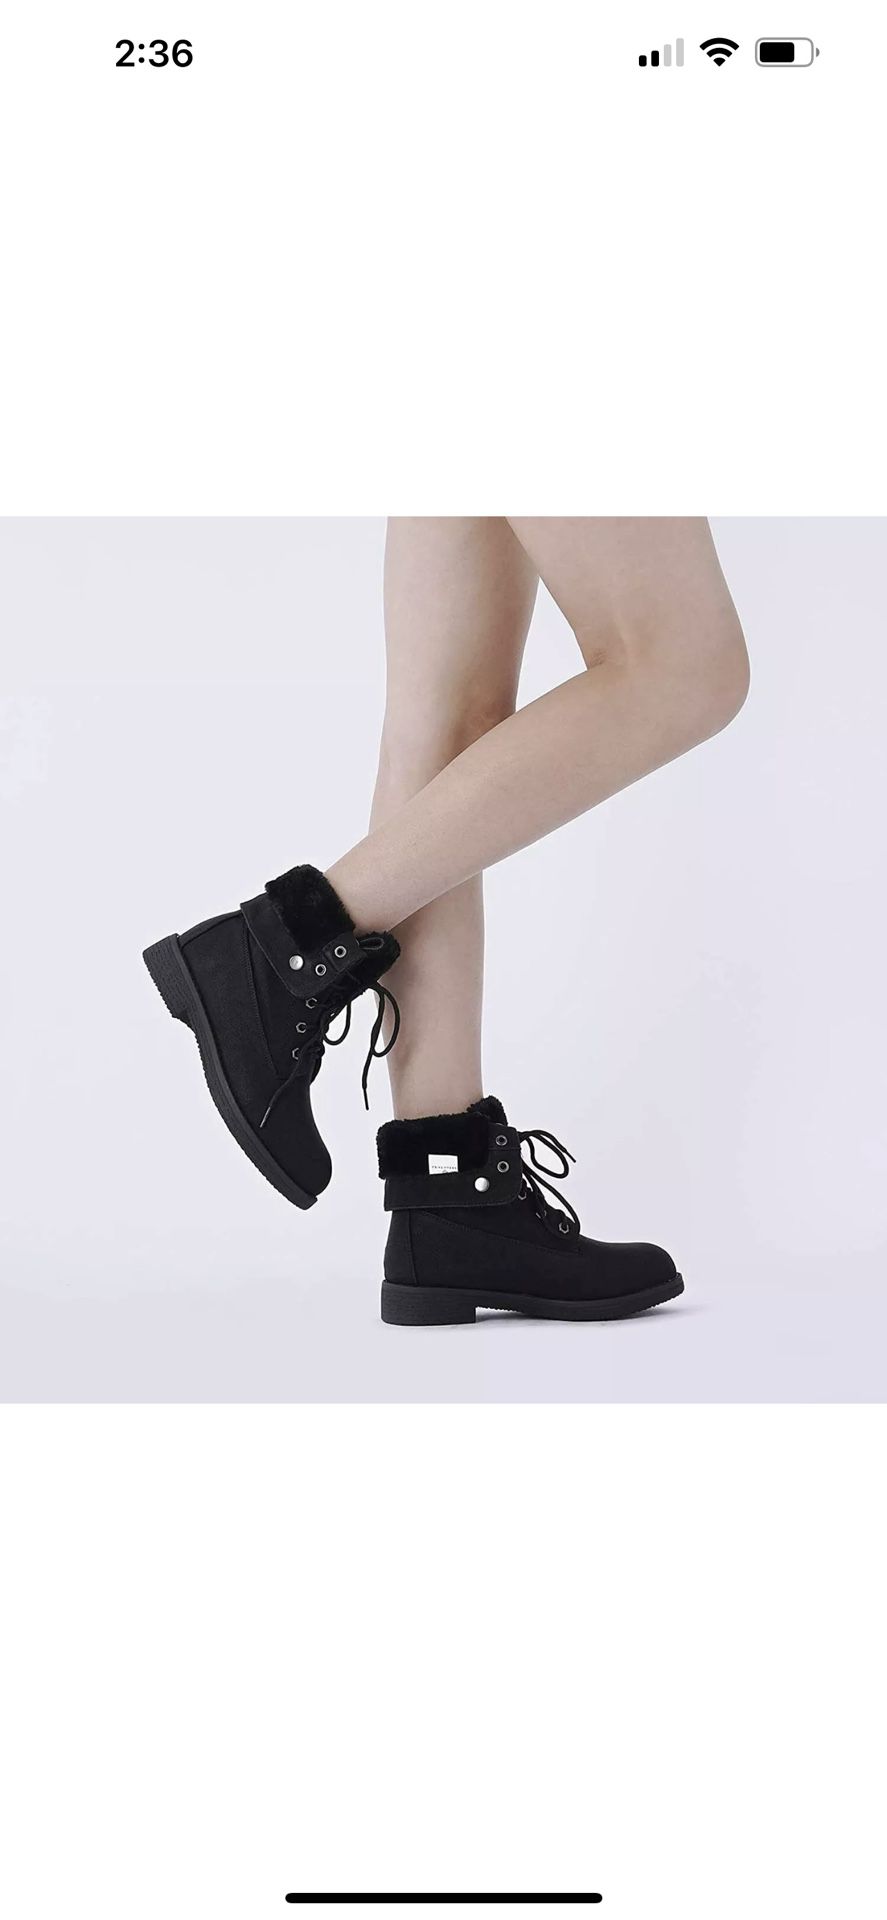 Women Winter Warm Snow Boots Fur-lining Lace Up Combat Boots Ankle Boots US SIZE